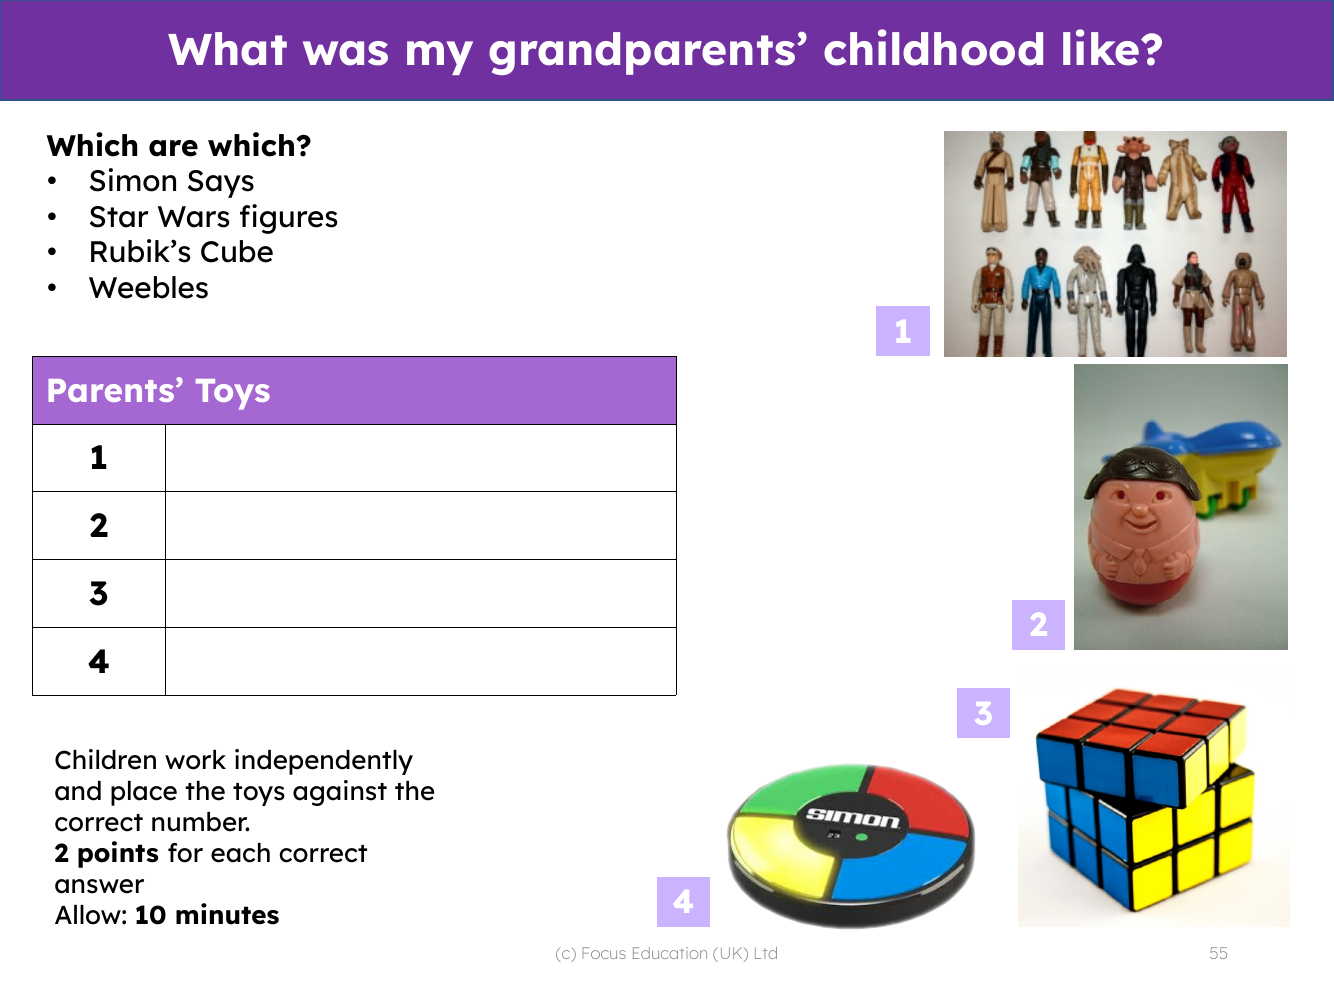 Which are which? - Parent's toys